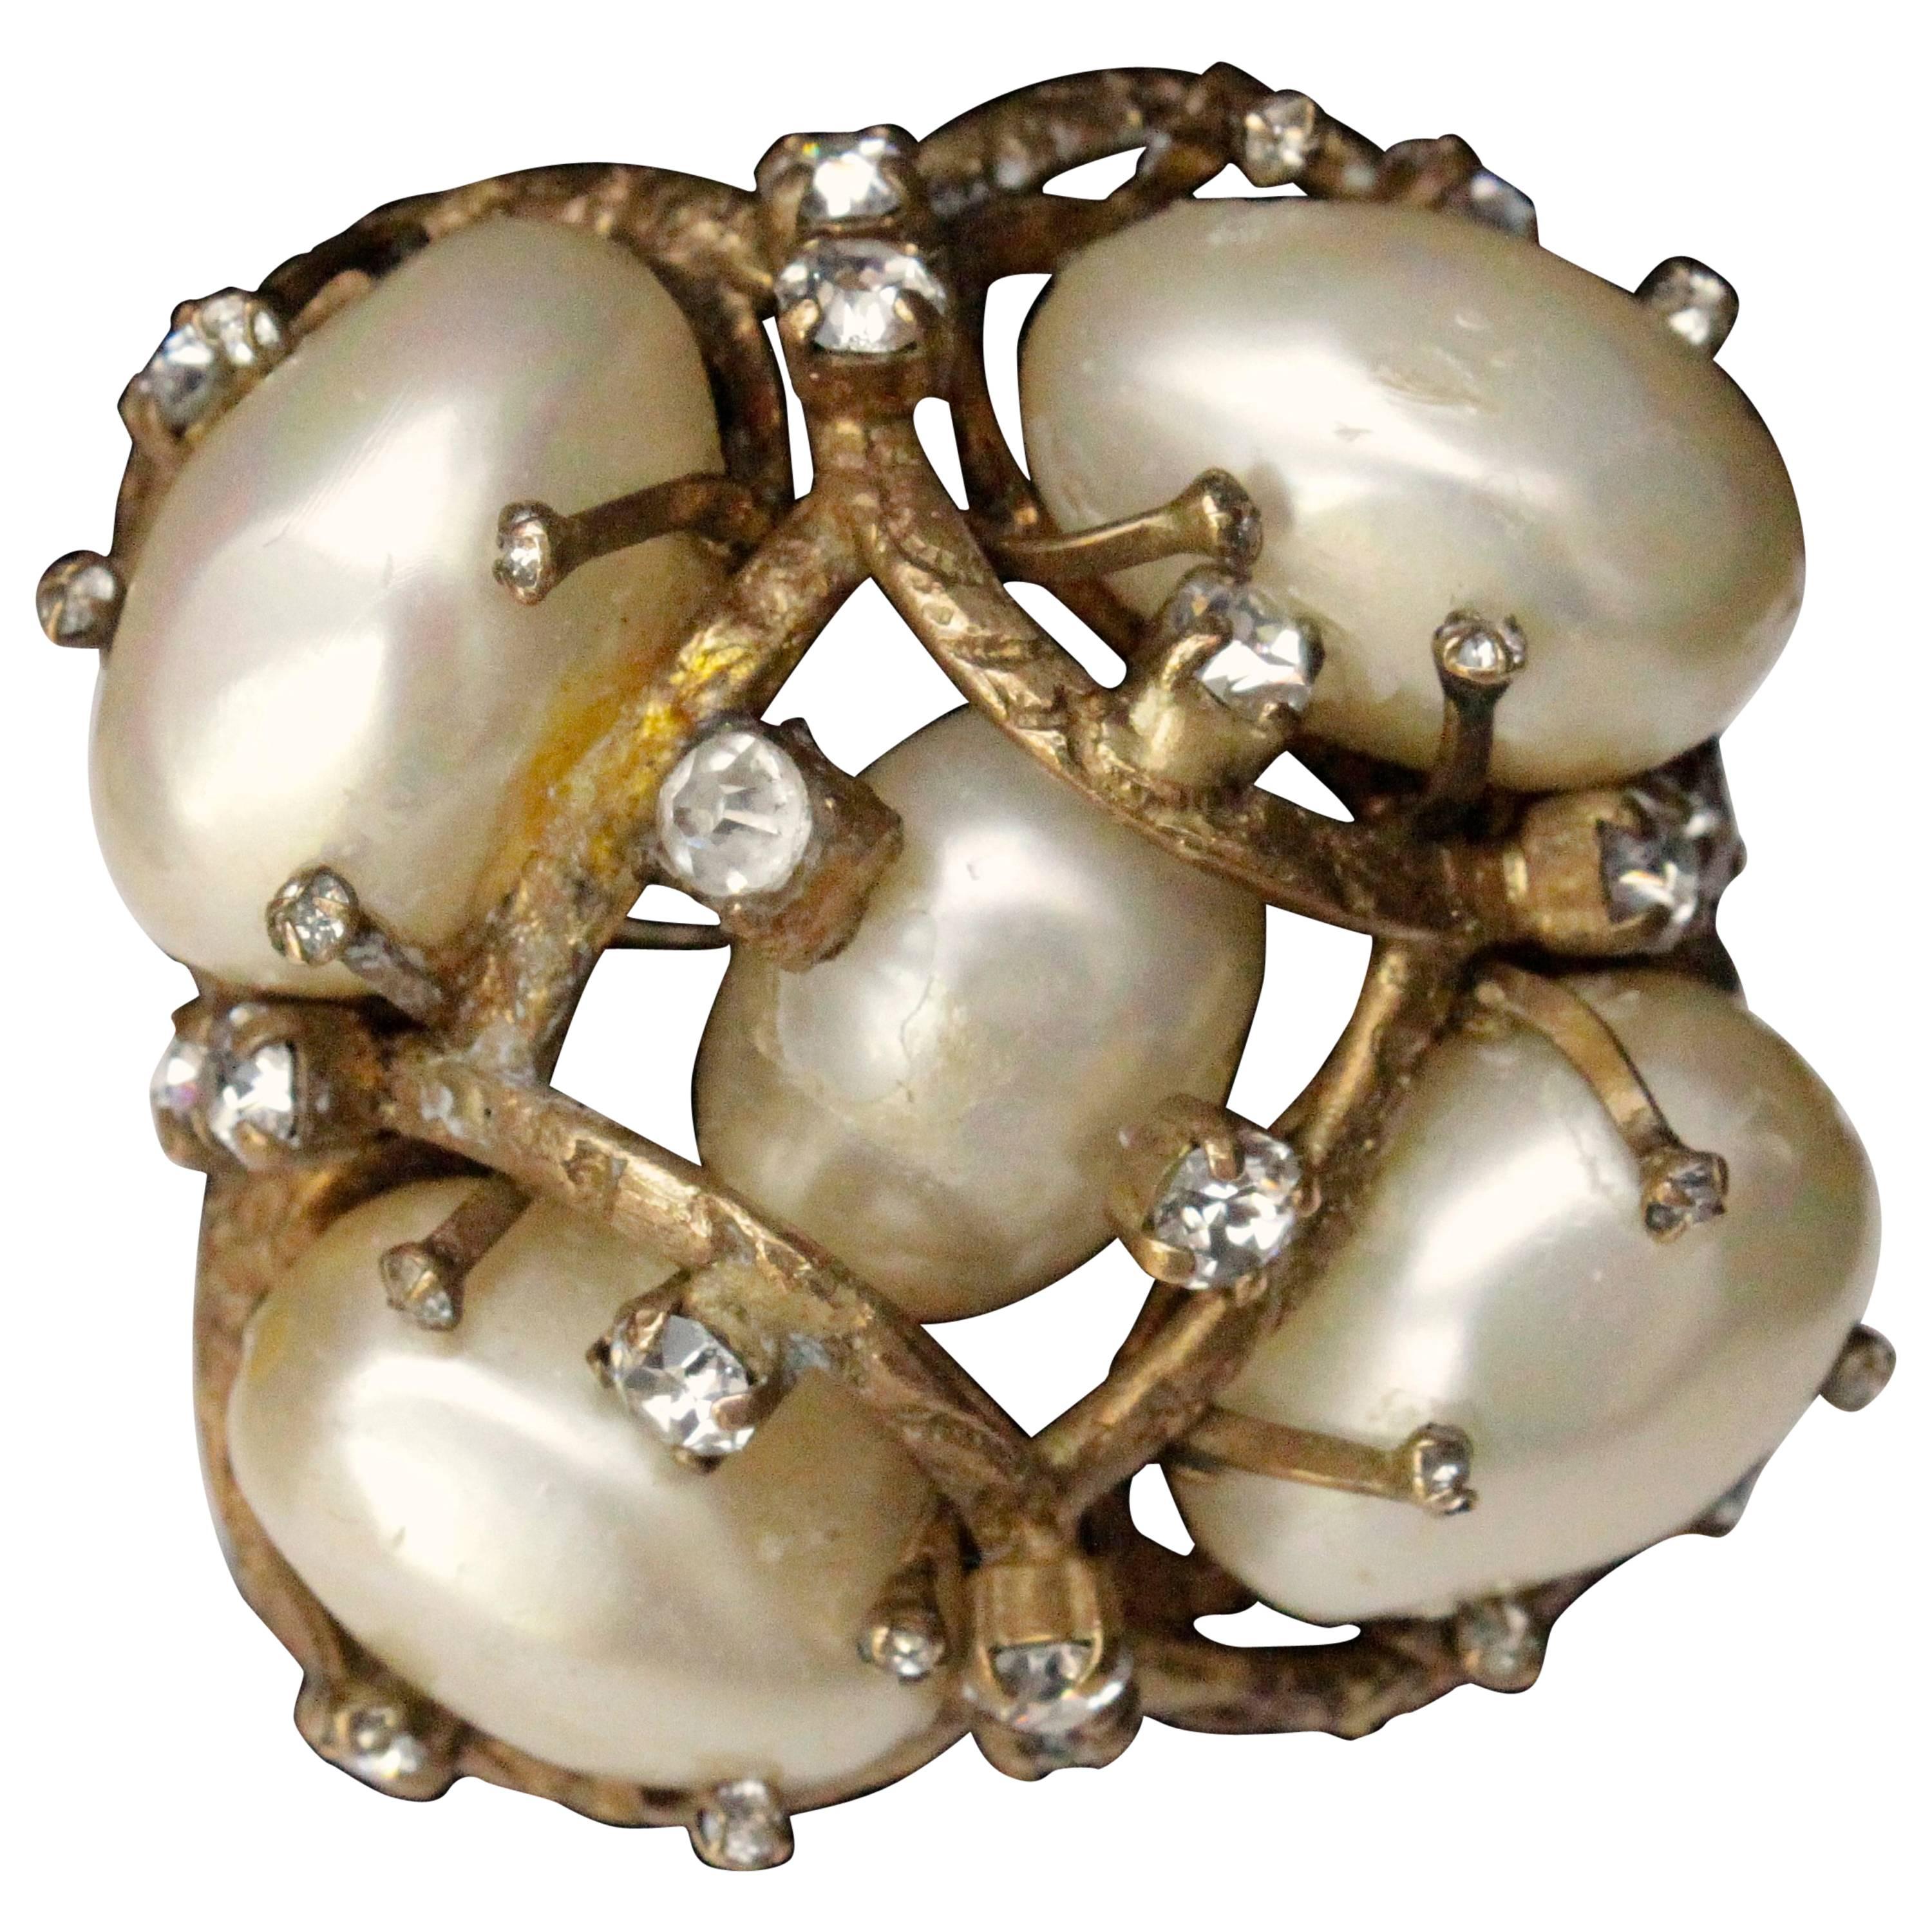 1955-1965s Chanel vintage brooch made of pearly beads and rhinestones 